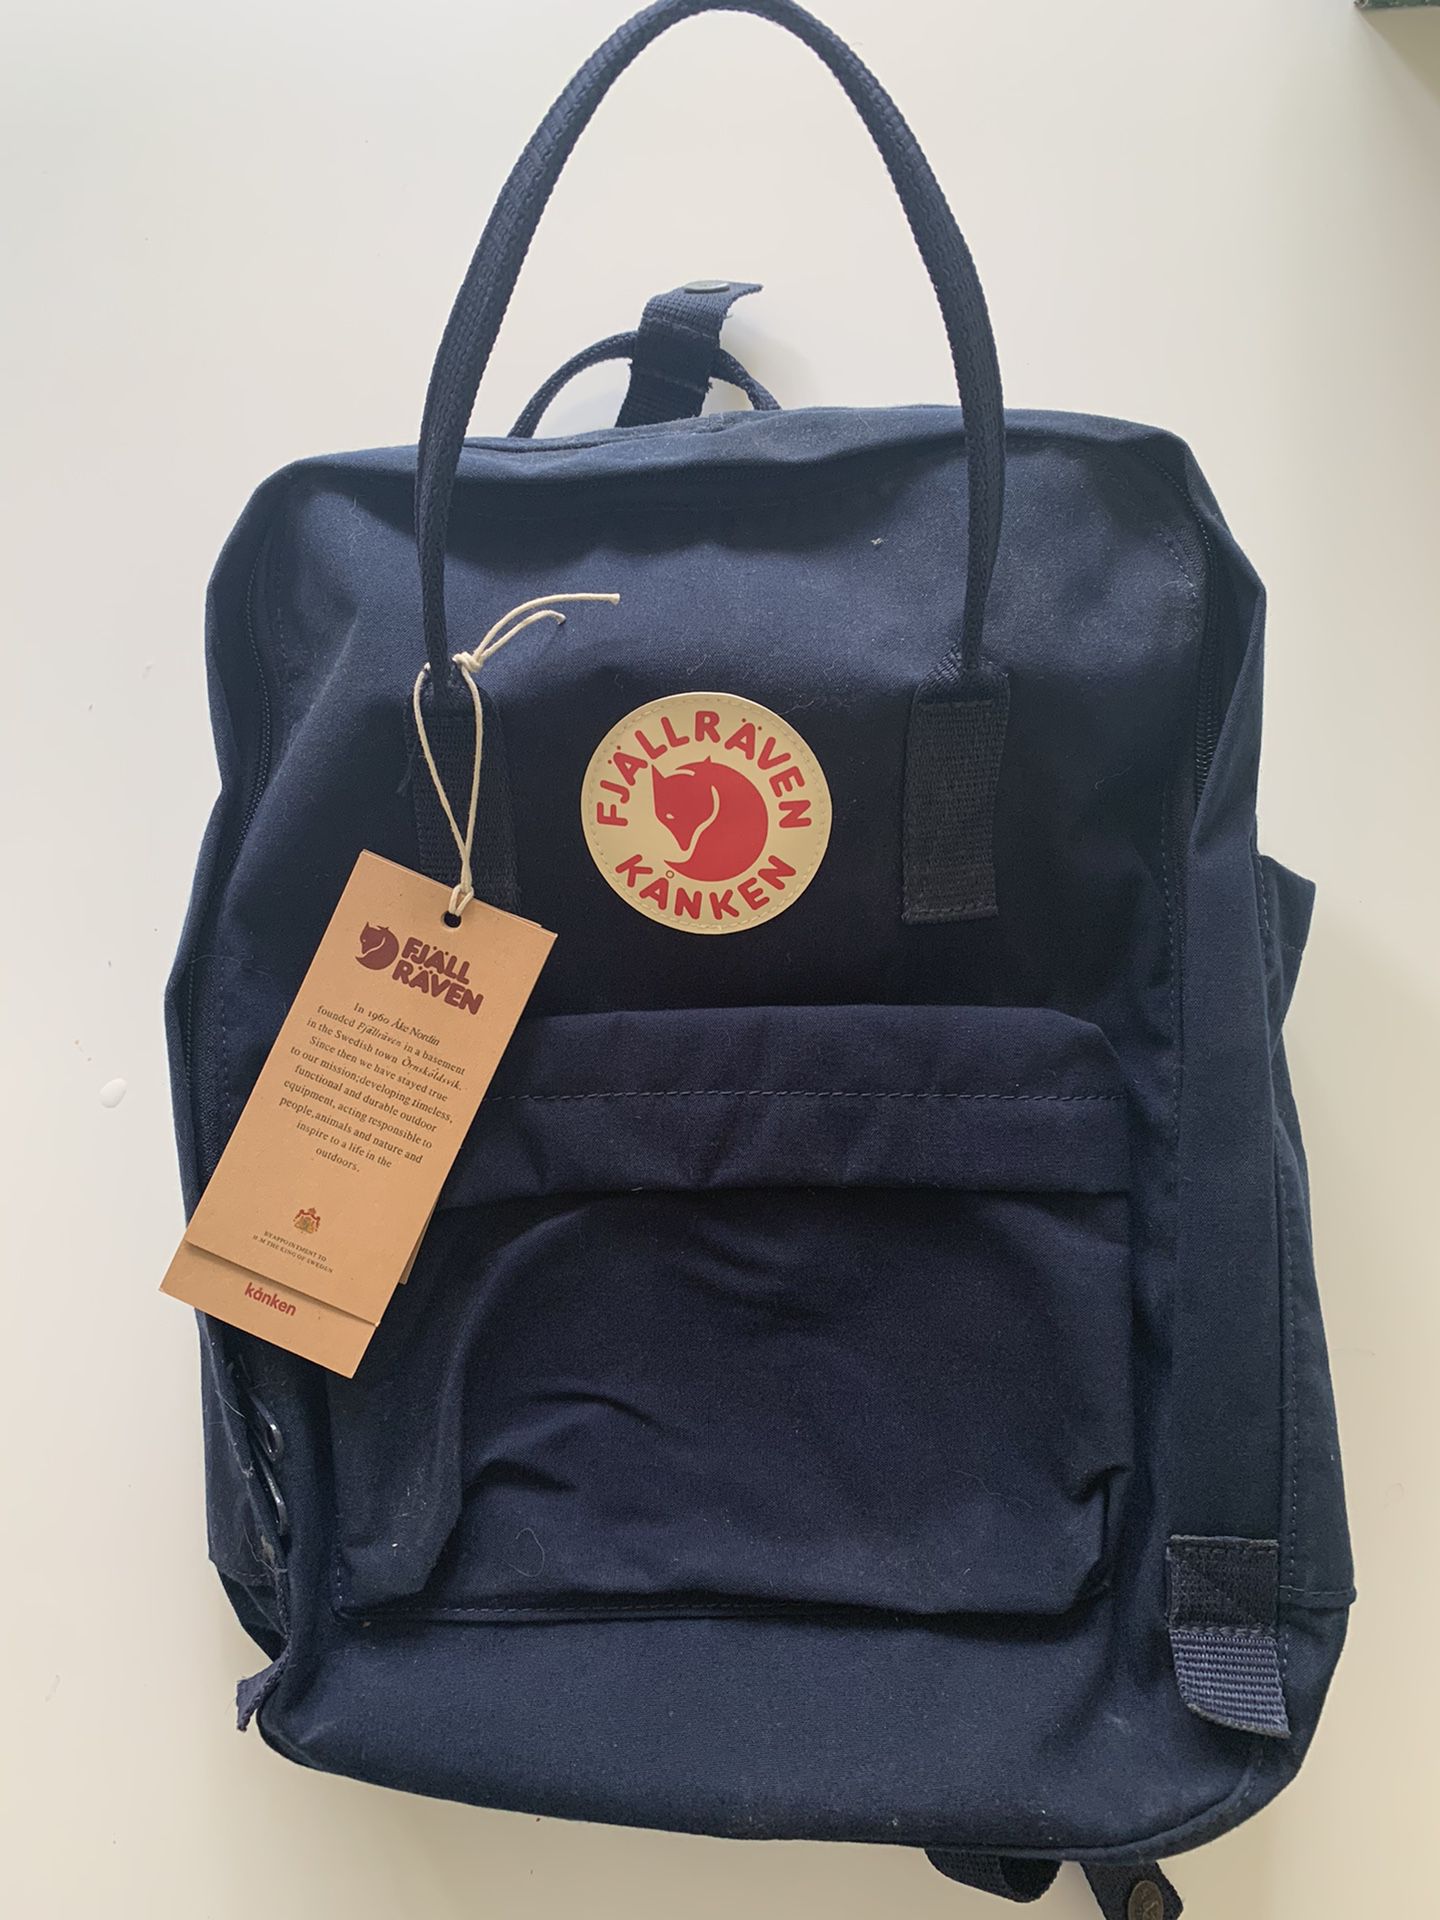 Fjallraven Backpack - Kanken - Brand New with Tags